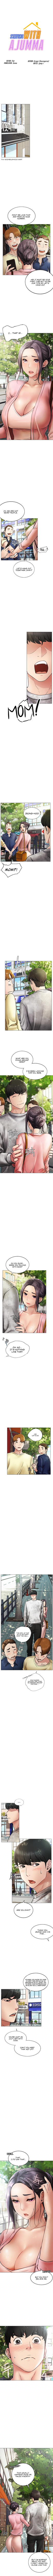 Staying with Ajumma - Chapter 1 Page 1